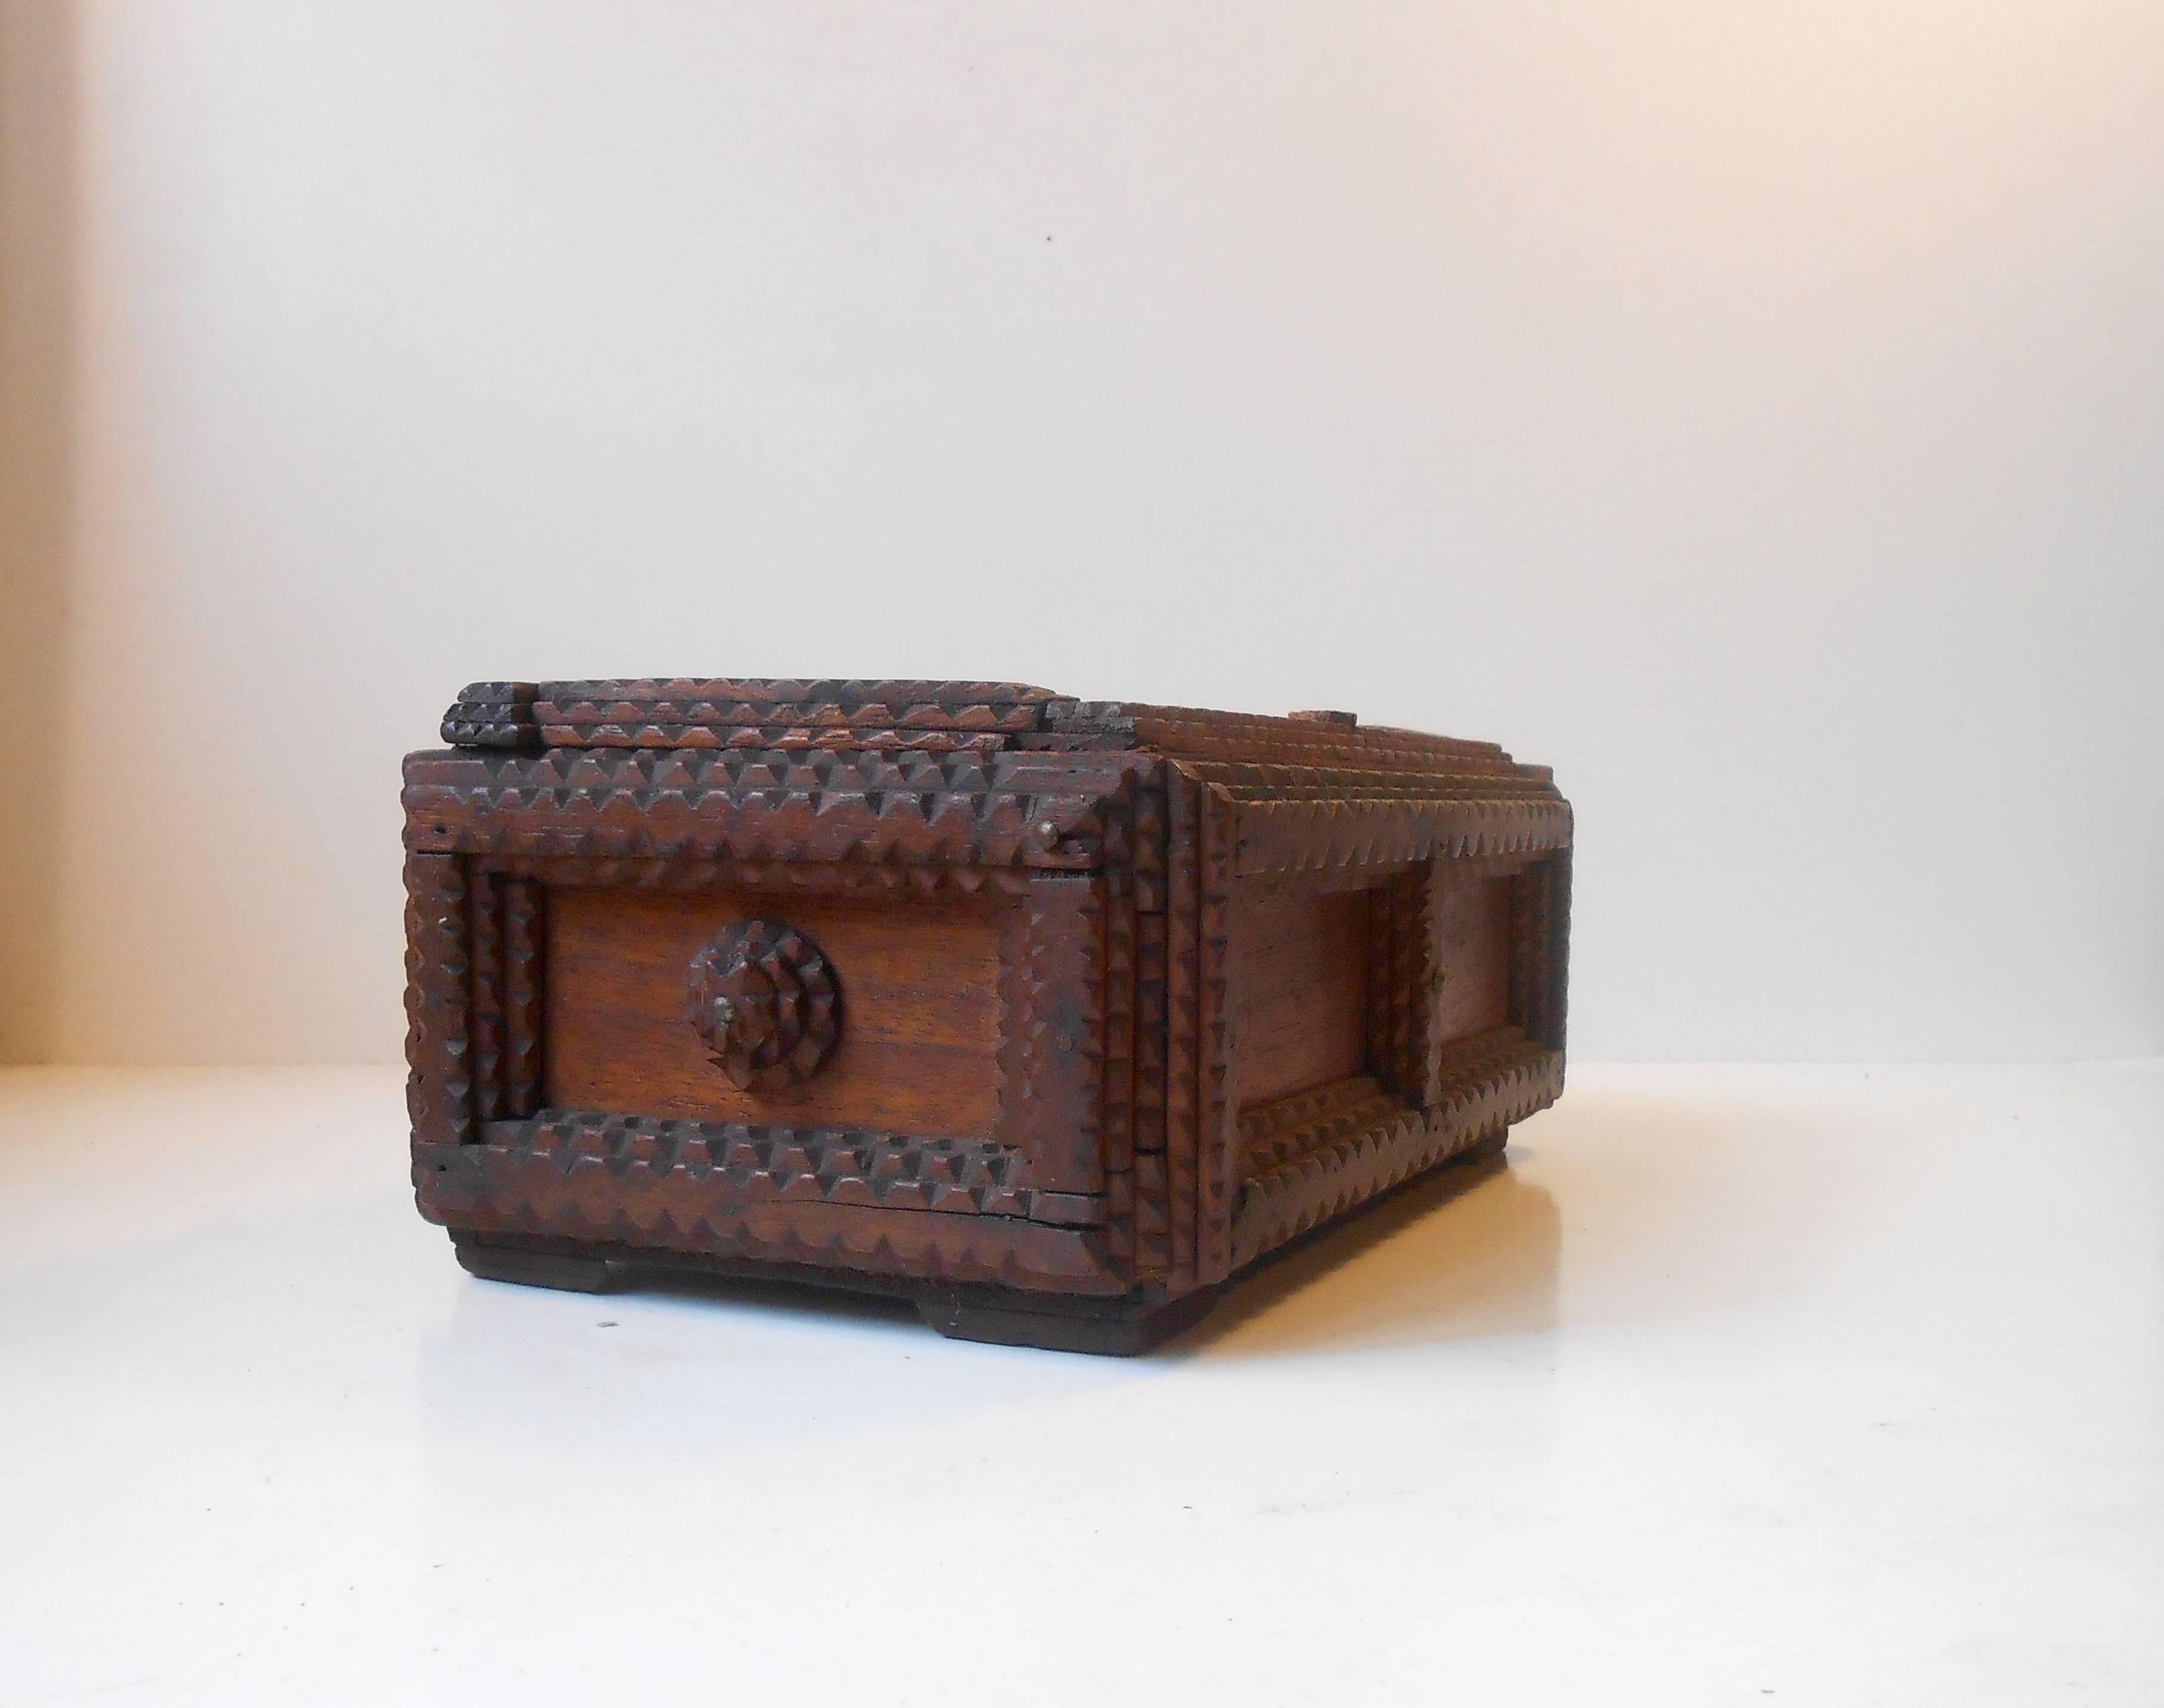 German Volk art box. Scaled down coffin. Hand carved with characteristic primitive detailing. Measurements: H 5 inches, W 10.25 inches, D 6.2 inches.